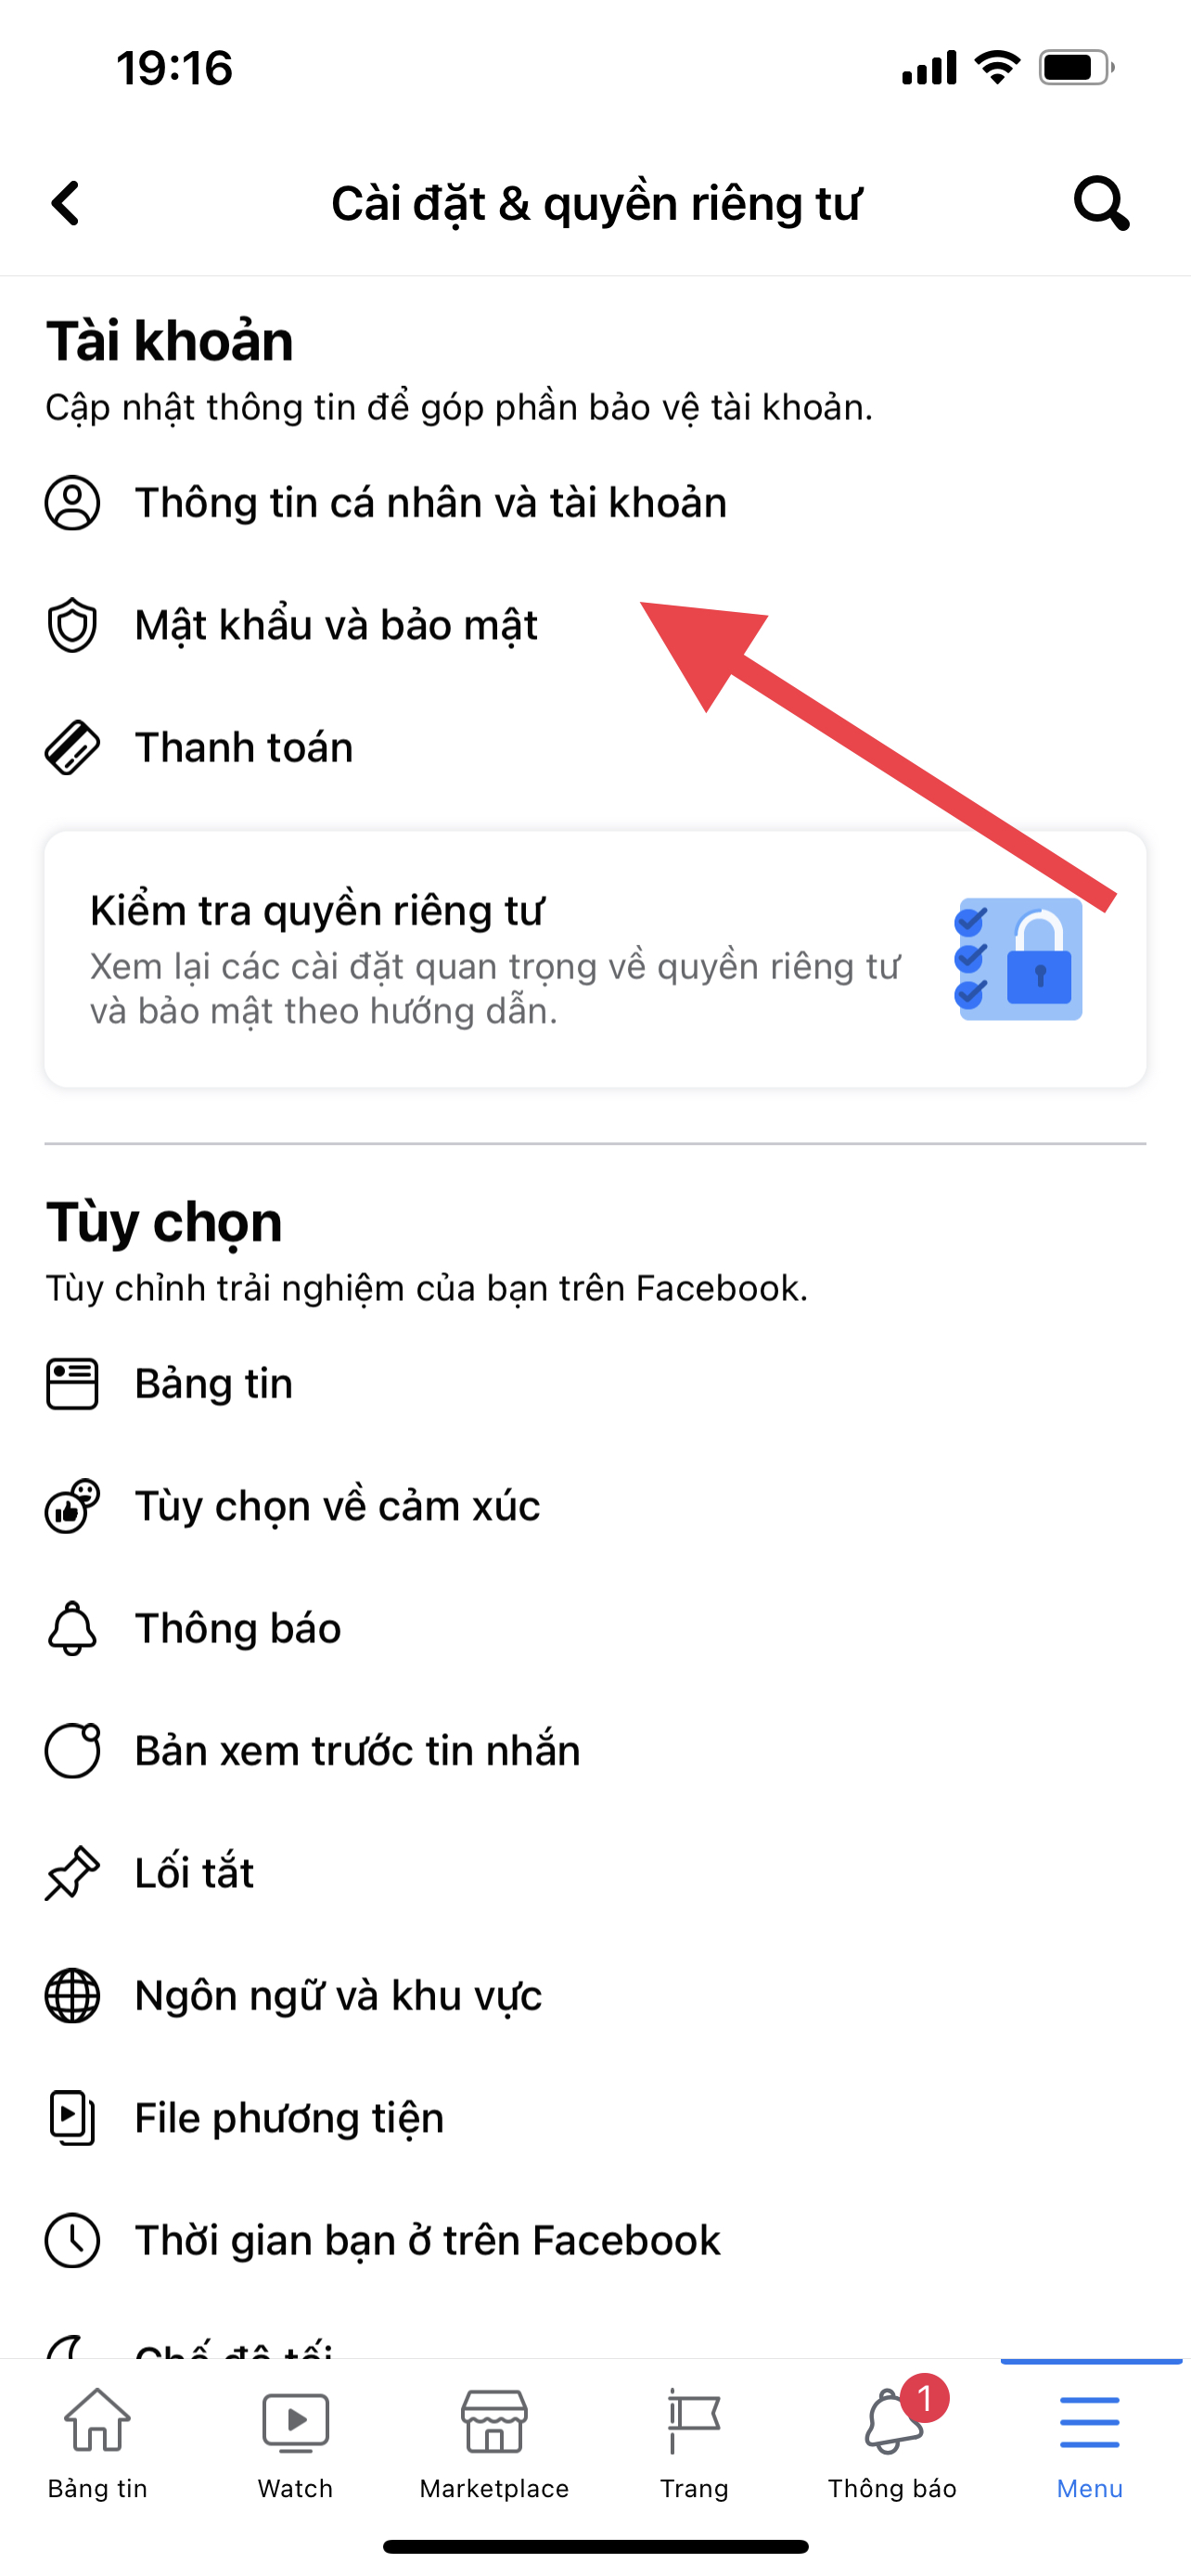 You may not know: Messenger does not have a sign out button, how to exit the account without deleting the application?  - photo 4.